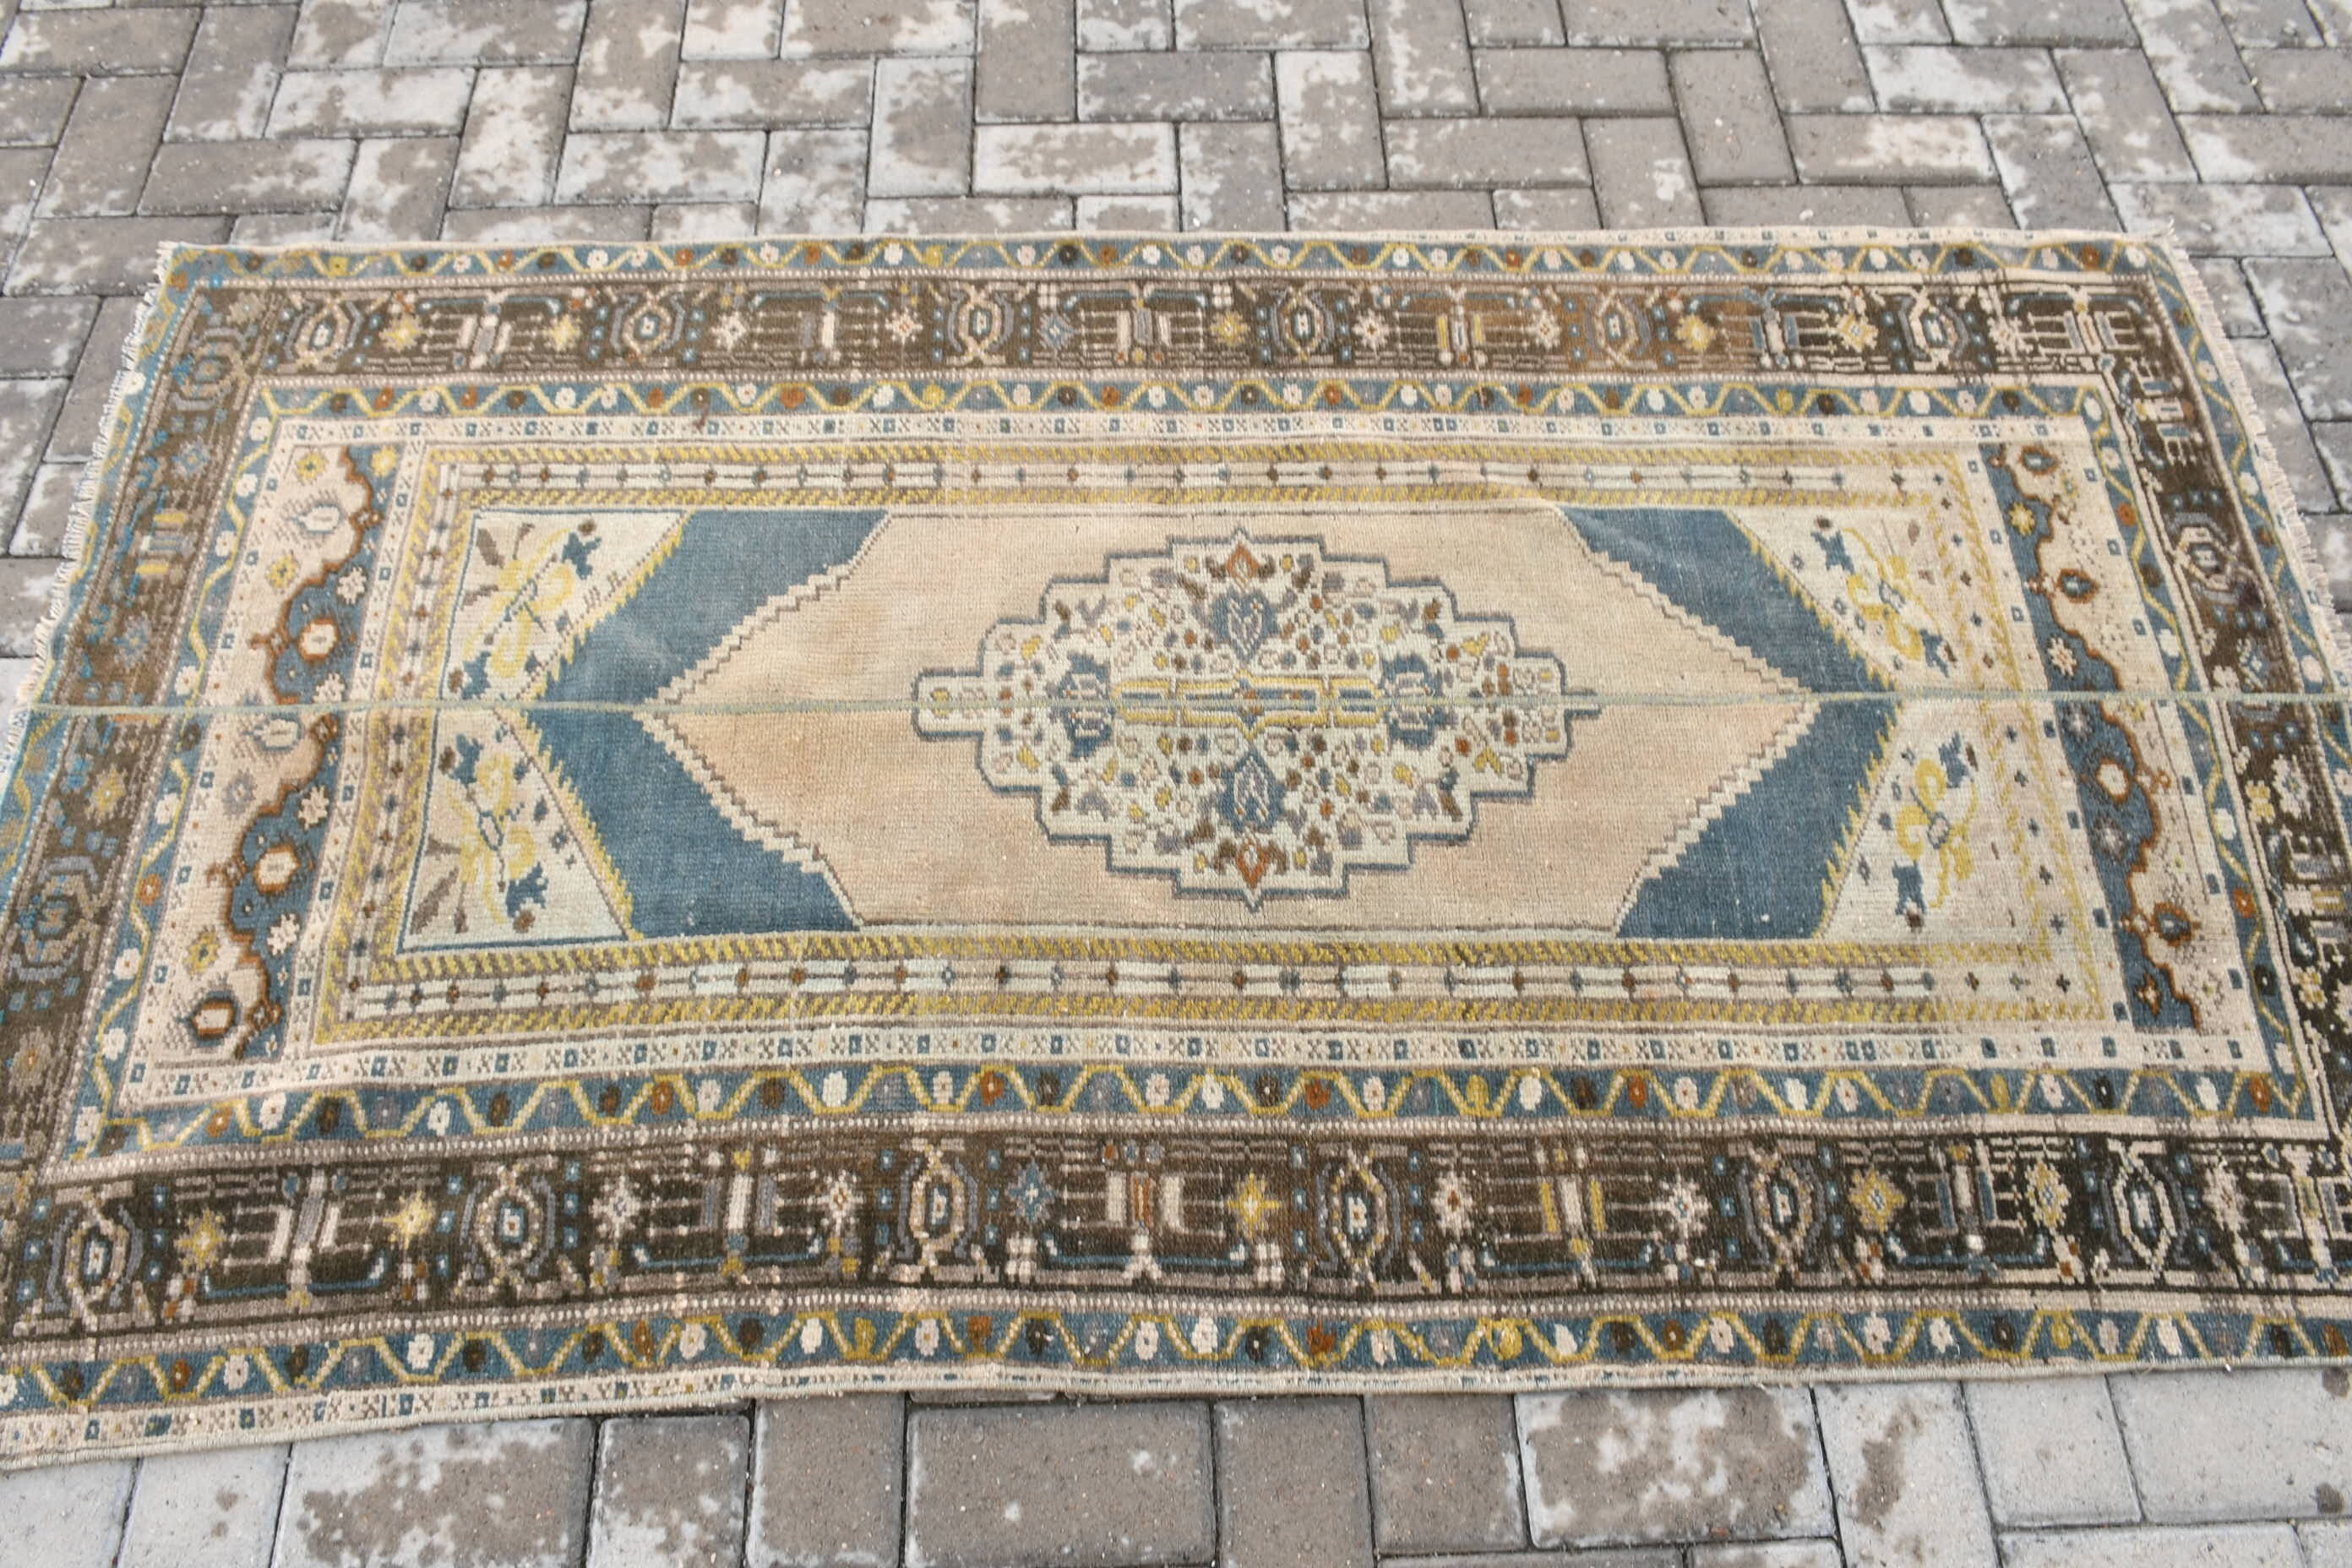 Vintage Rug, Rugs for Entry, Entry Rug, Turkish Rugs, Oriental Rugs, 3.5x6.2 ft Accent Rug, Brown Oushak Rug, Floor Rugs, Kitchen Rug